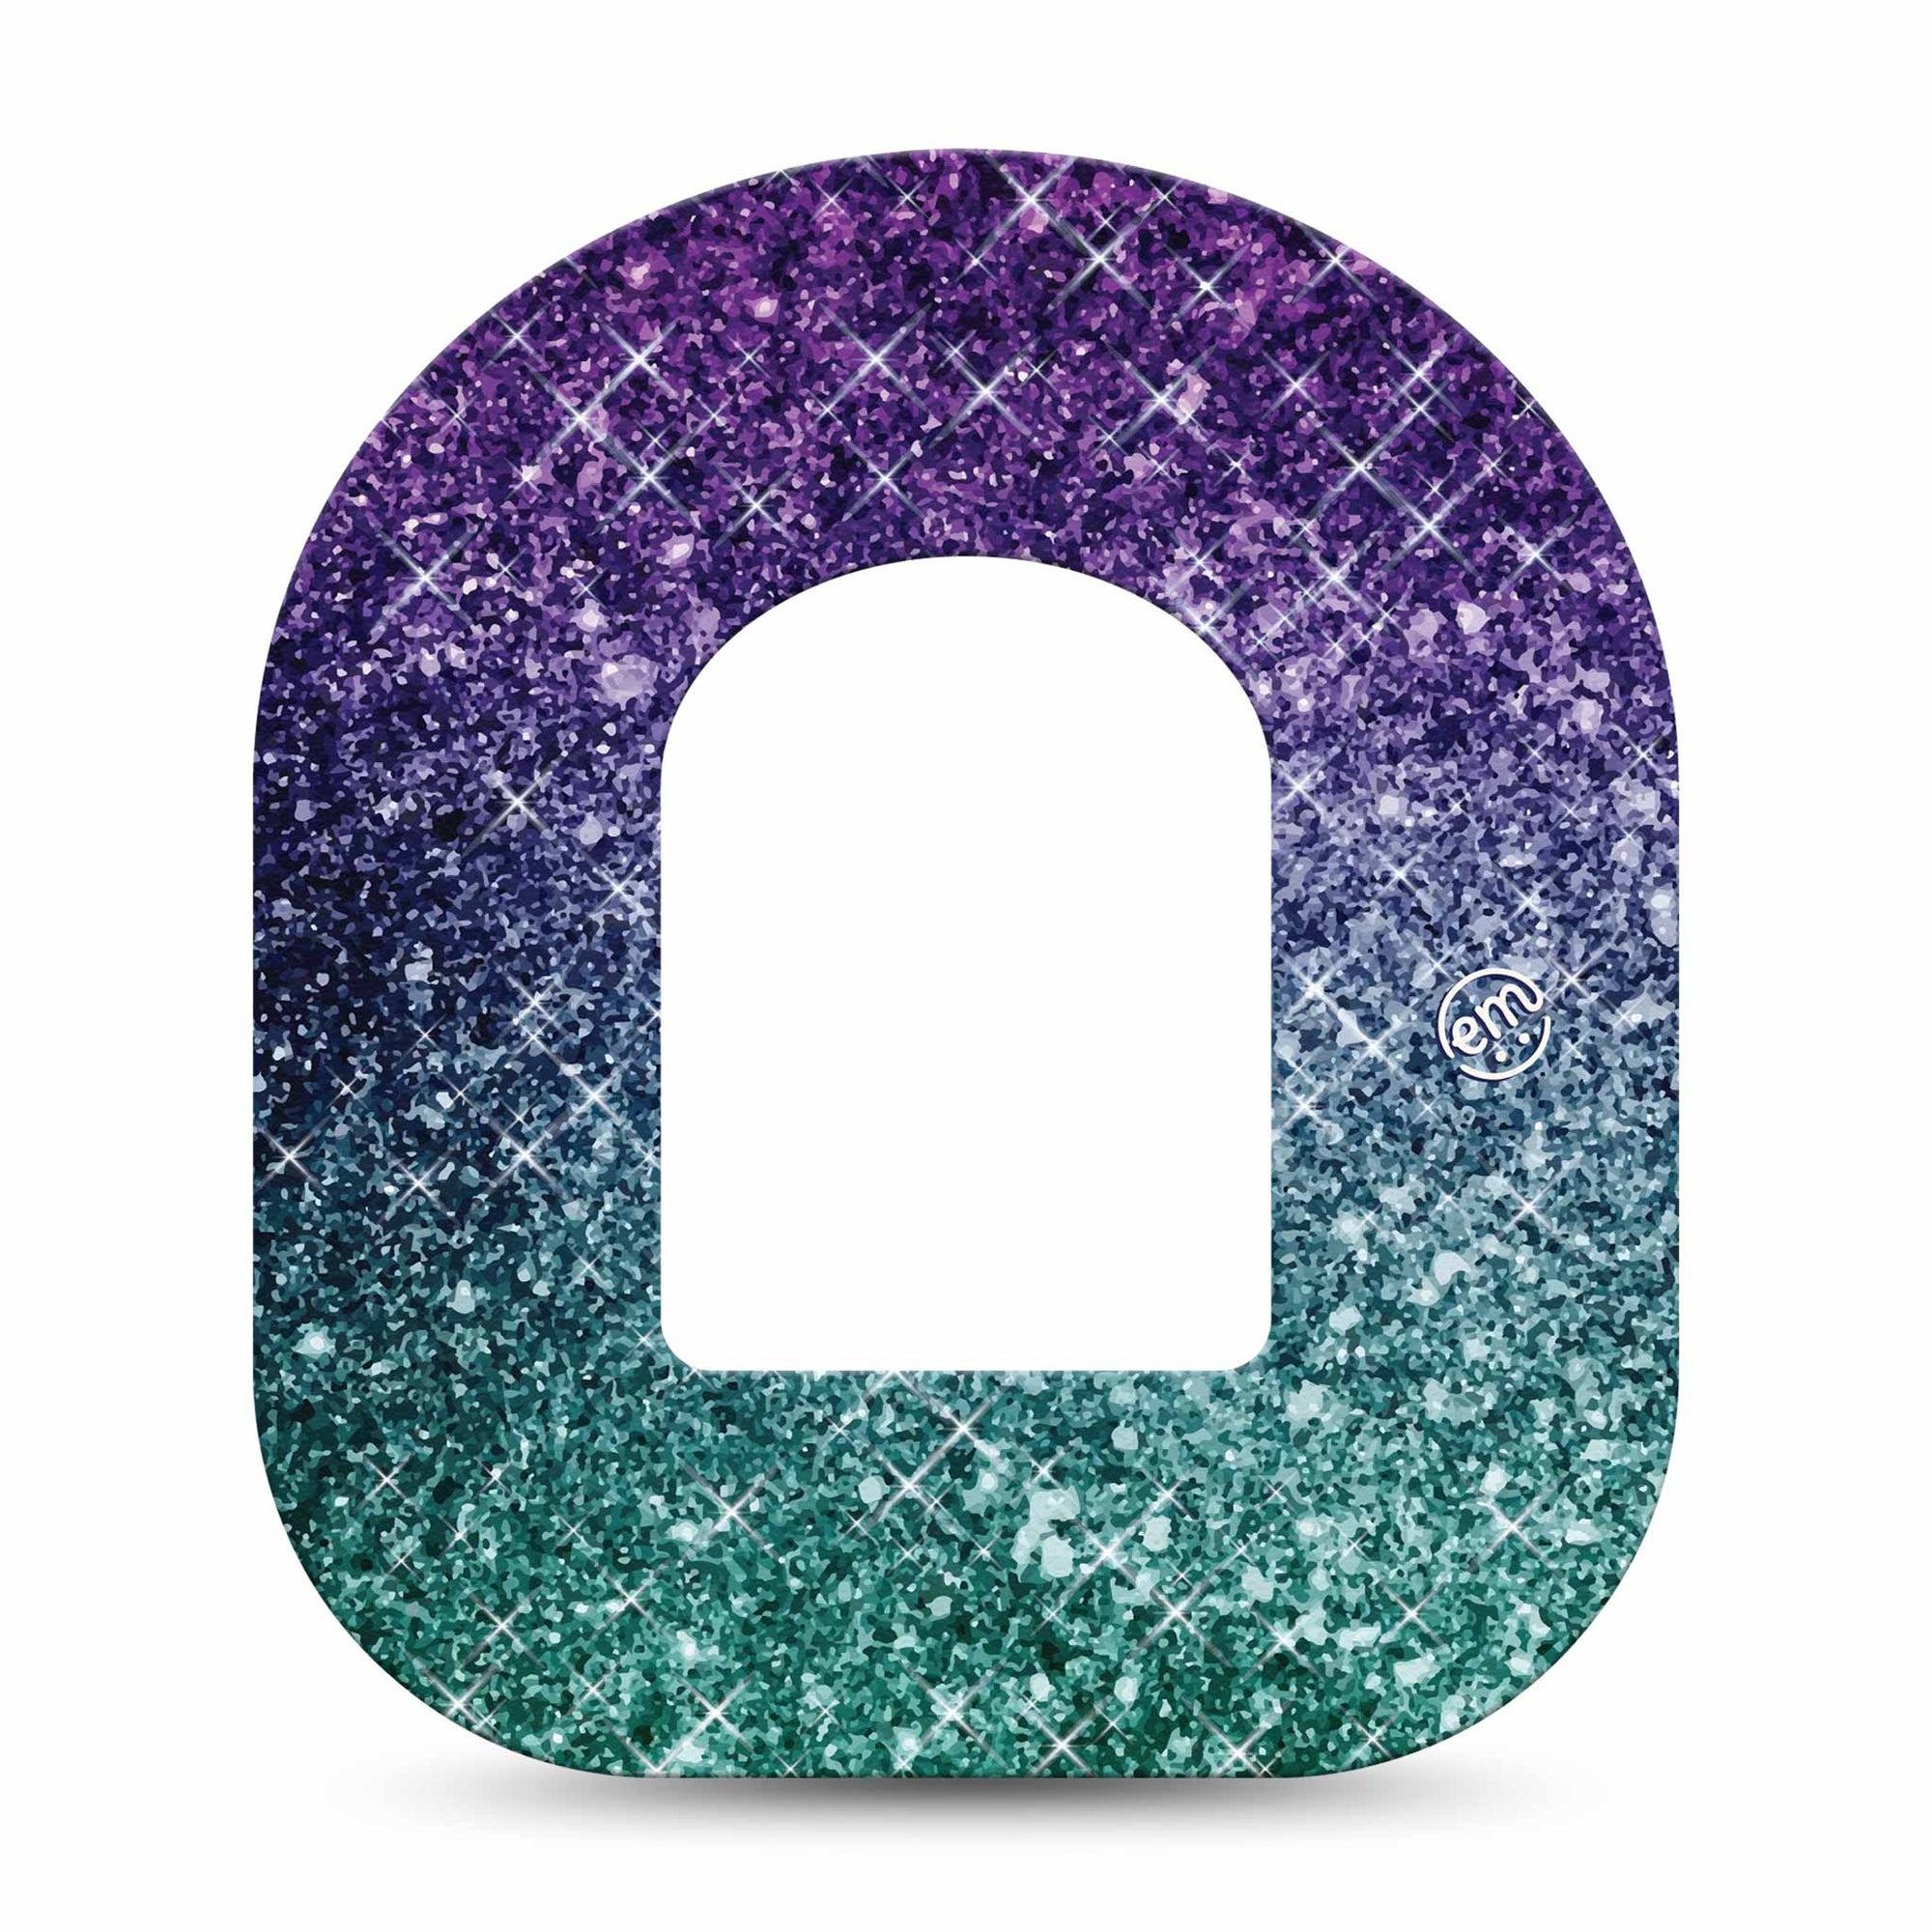 ExpressionMed Glittering Ombre Pod Tape